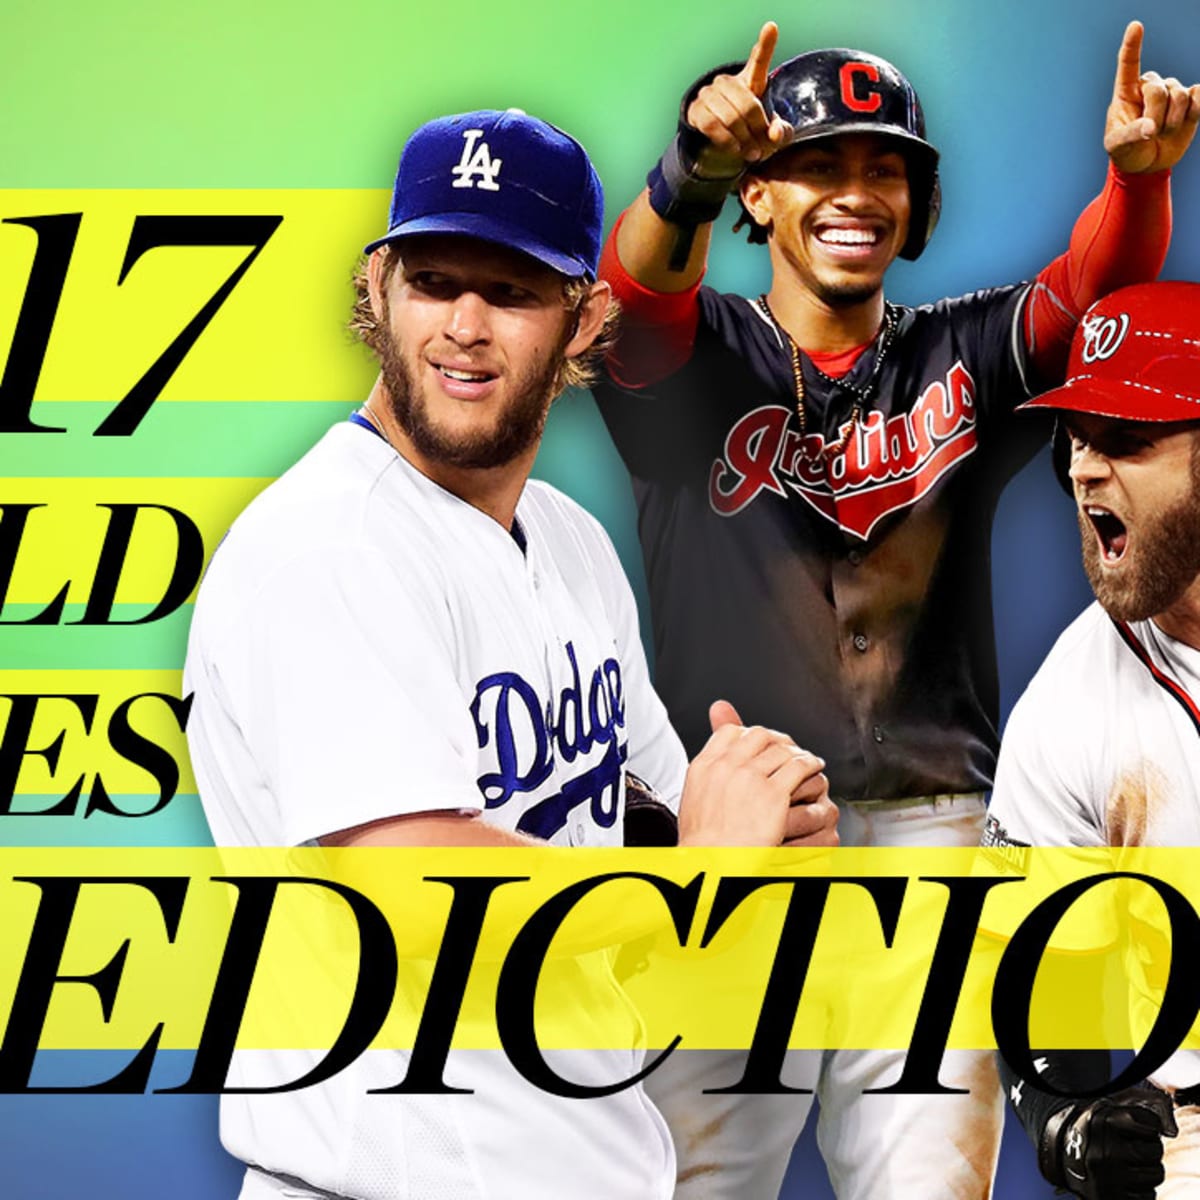 MLB 2017 predictions: Cubs poised to knock on World Series door again